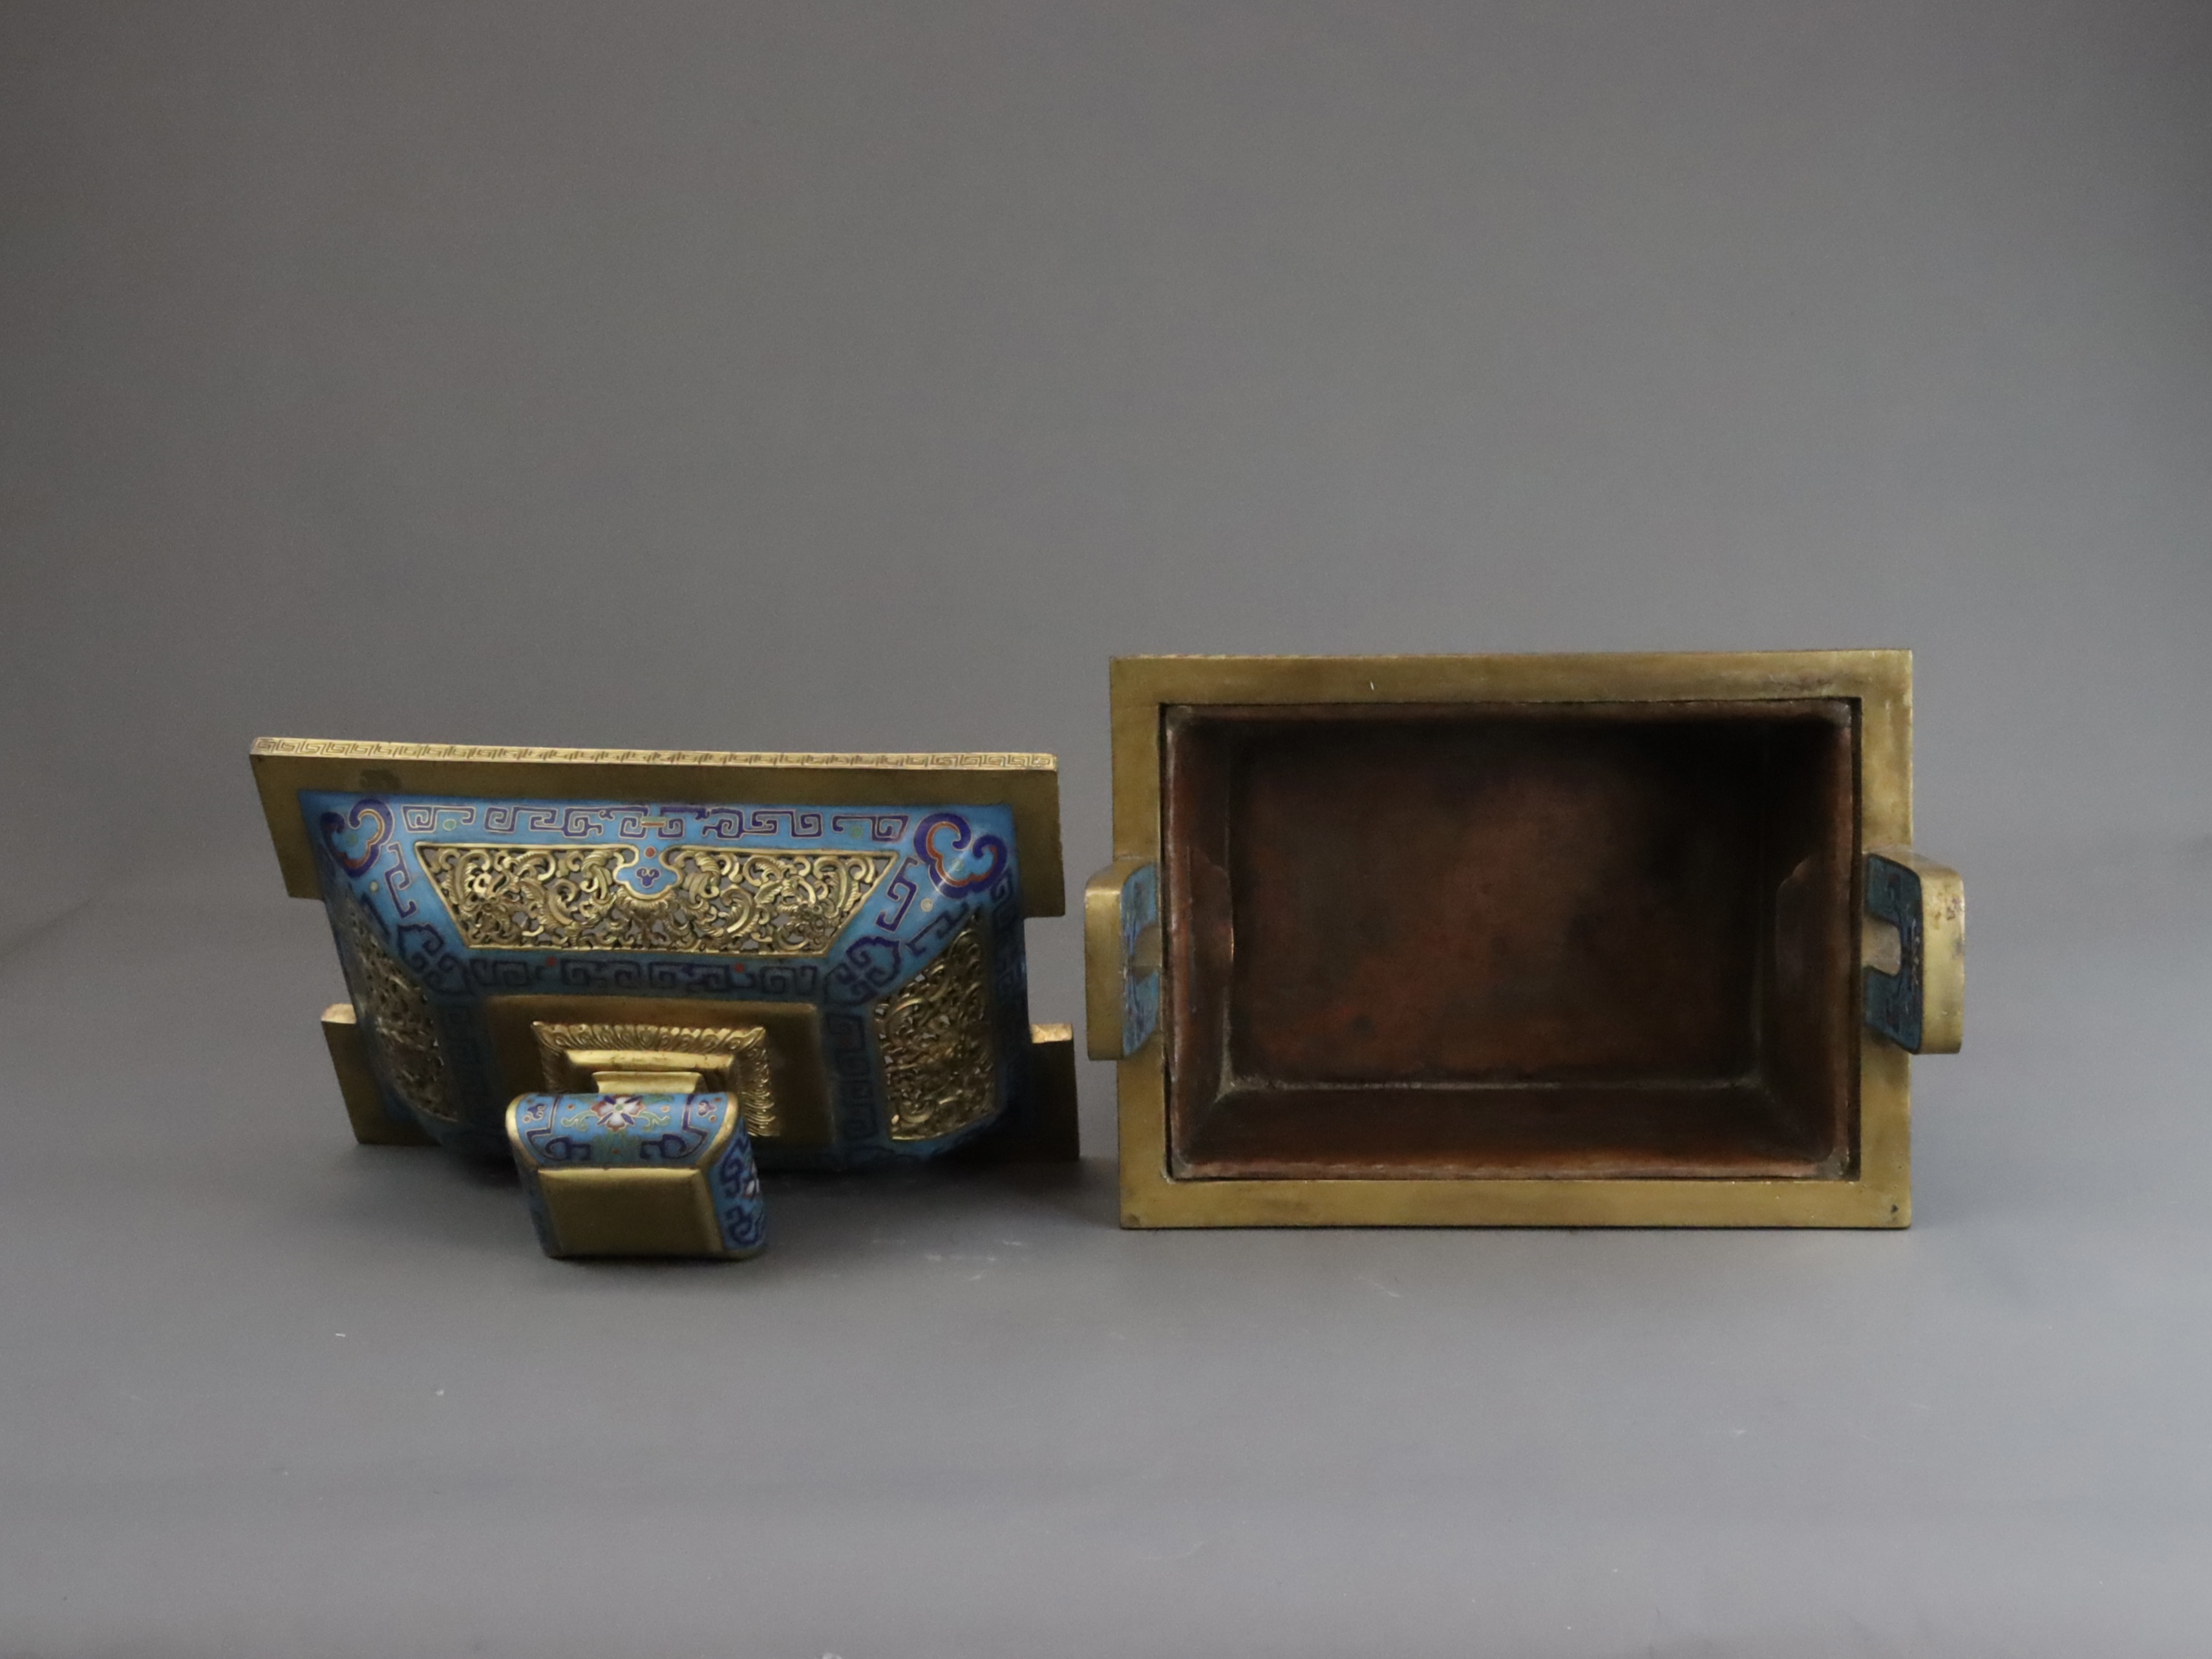 An Arabic Inscribed Cloisonne Censer and Cover, fang ding, late Qing dynasty - Image 7 of 9